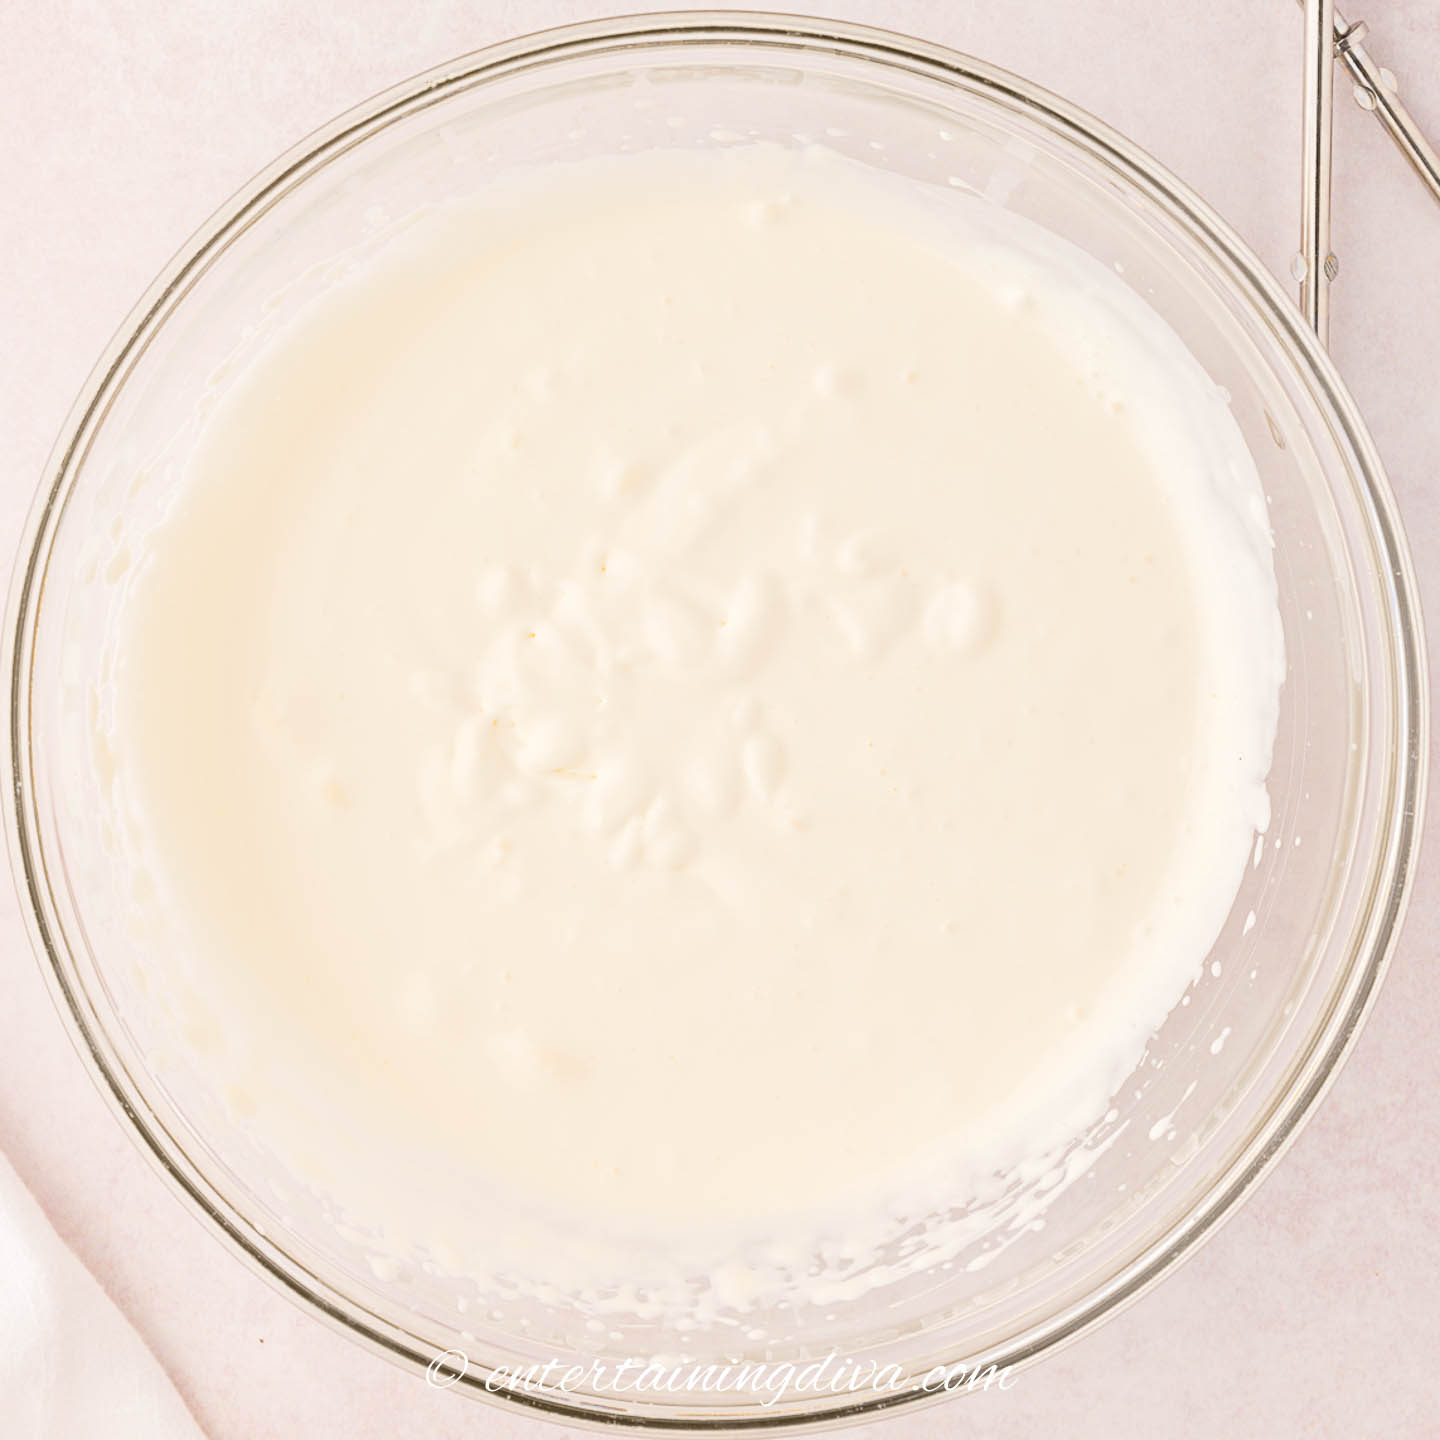 Whipping cream in a mixing bowl